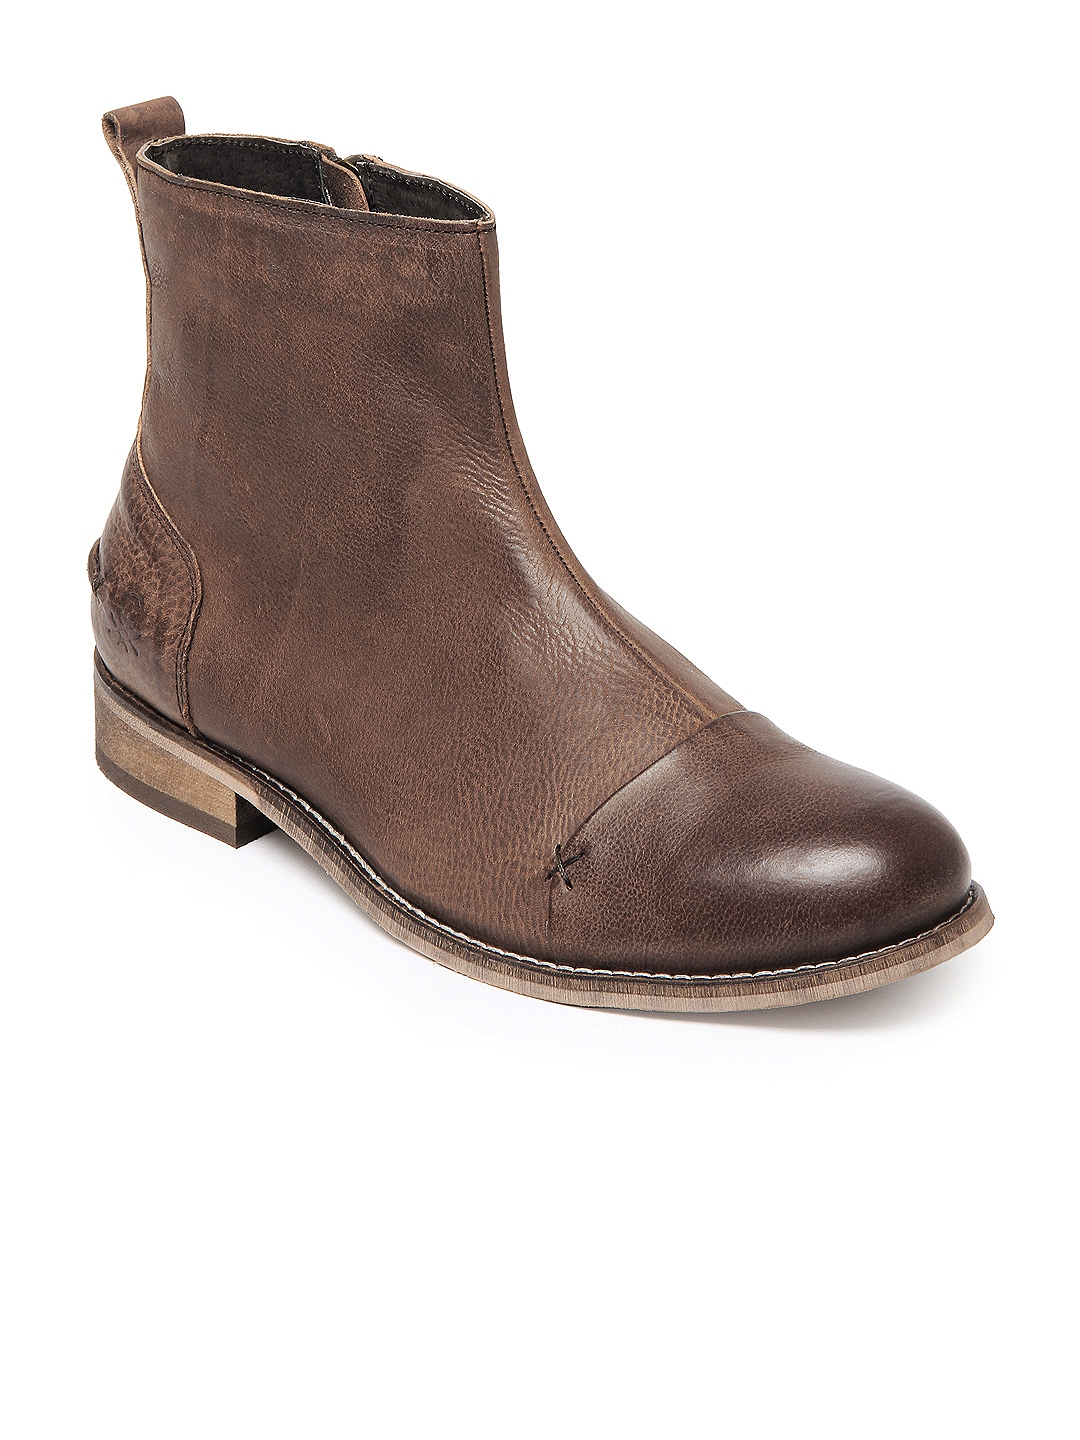 Buy United Colors Of Benetton Men Brown Leather Boots - Casual Shoes ...